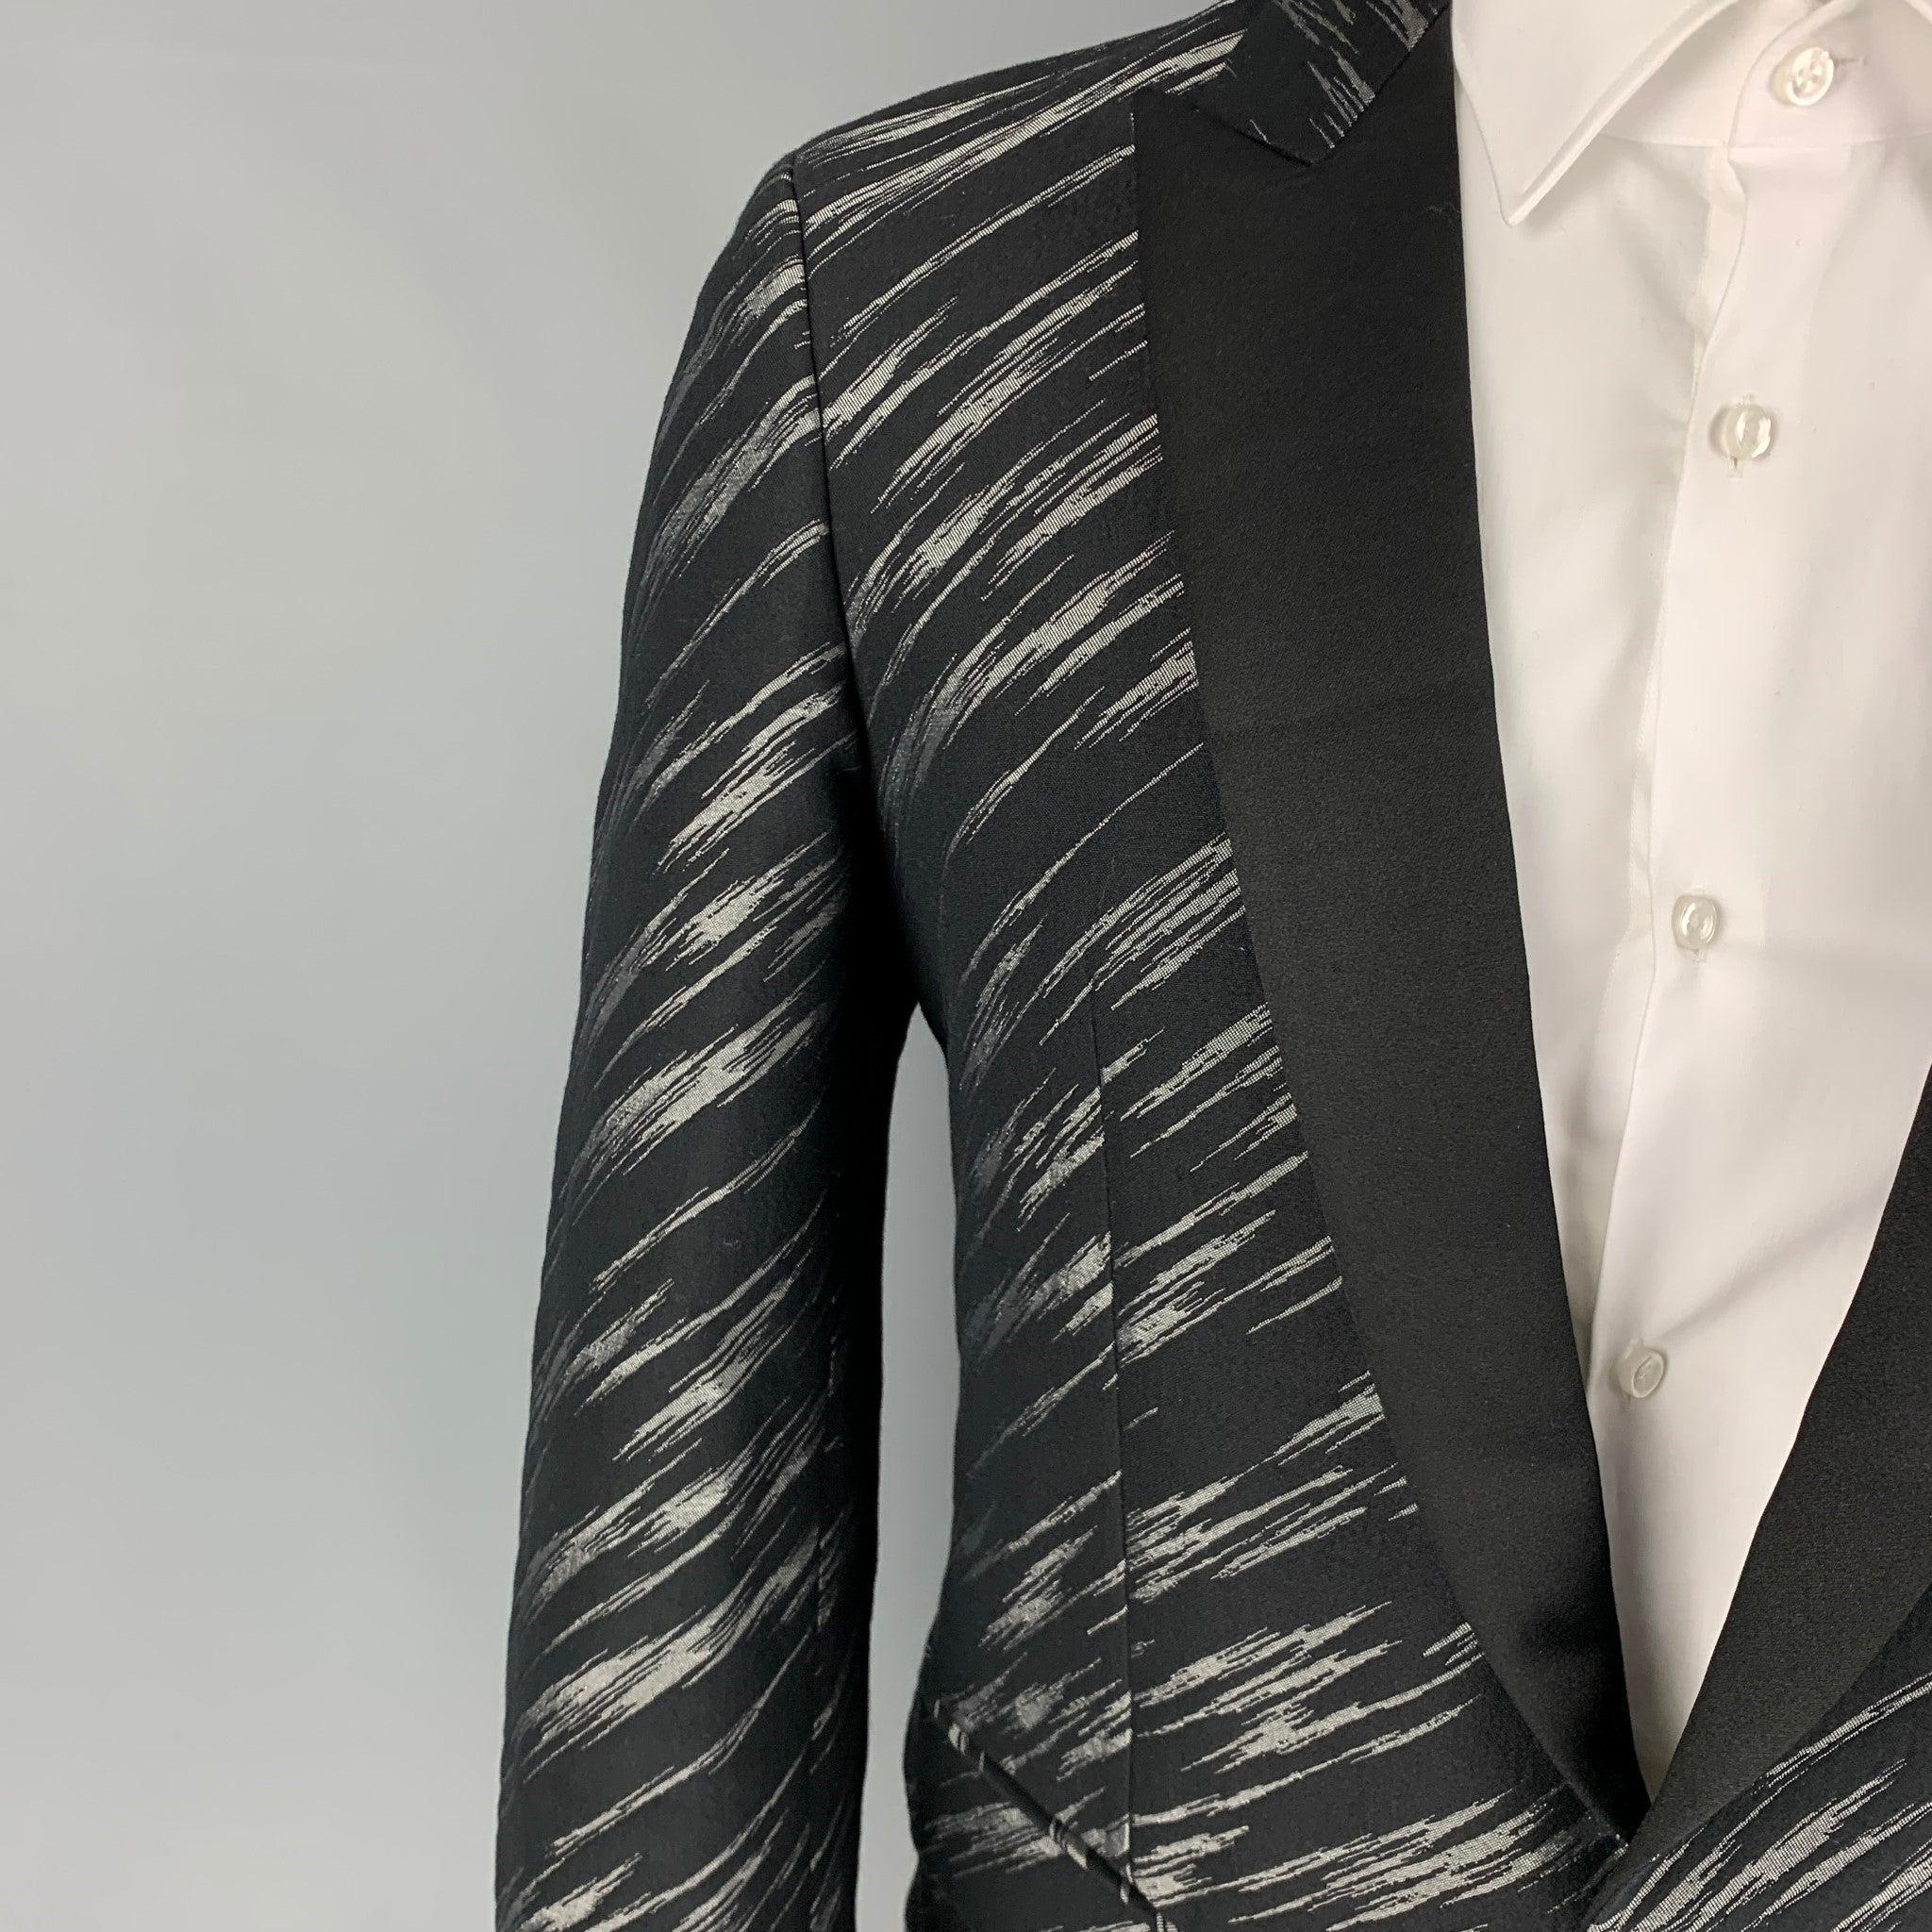 JUST CAVALLI sport coat comes in a black & grey jacquard wool blend with a full liner featuring a peak lapel, flap pockets, single back vent, and a single button closure. Made in Italy.
Excellent
Pre-Owned Condition. 

Marked:   48 

Measurements: 
